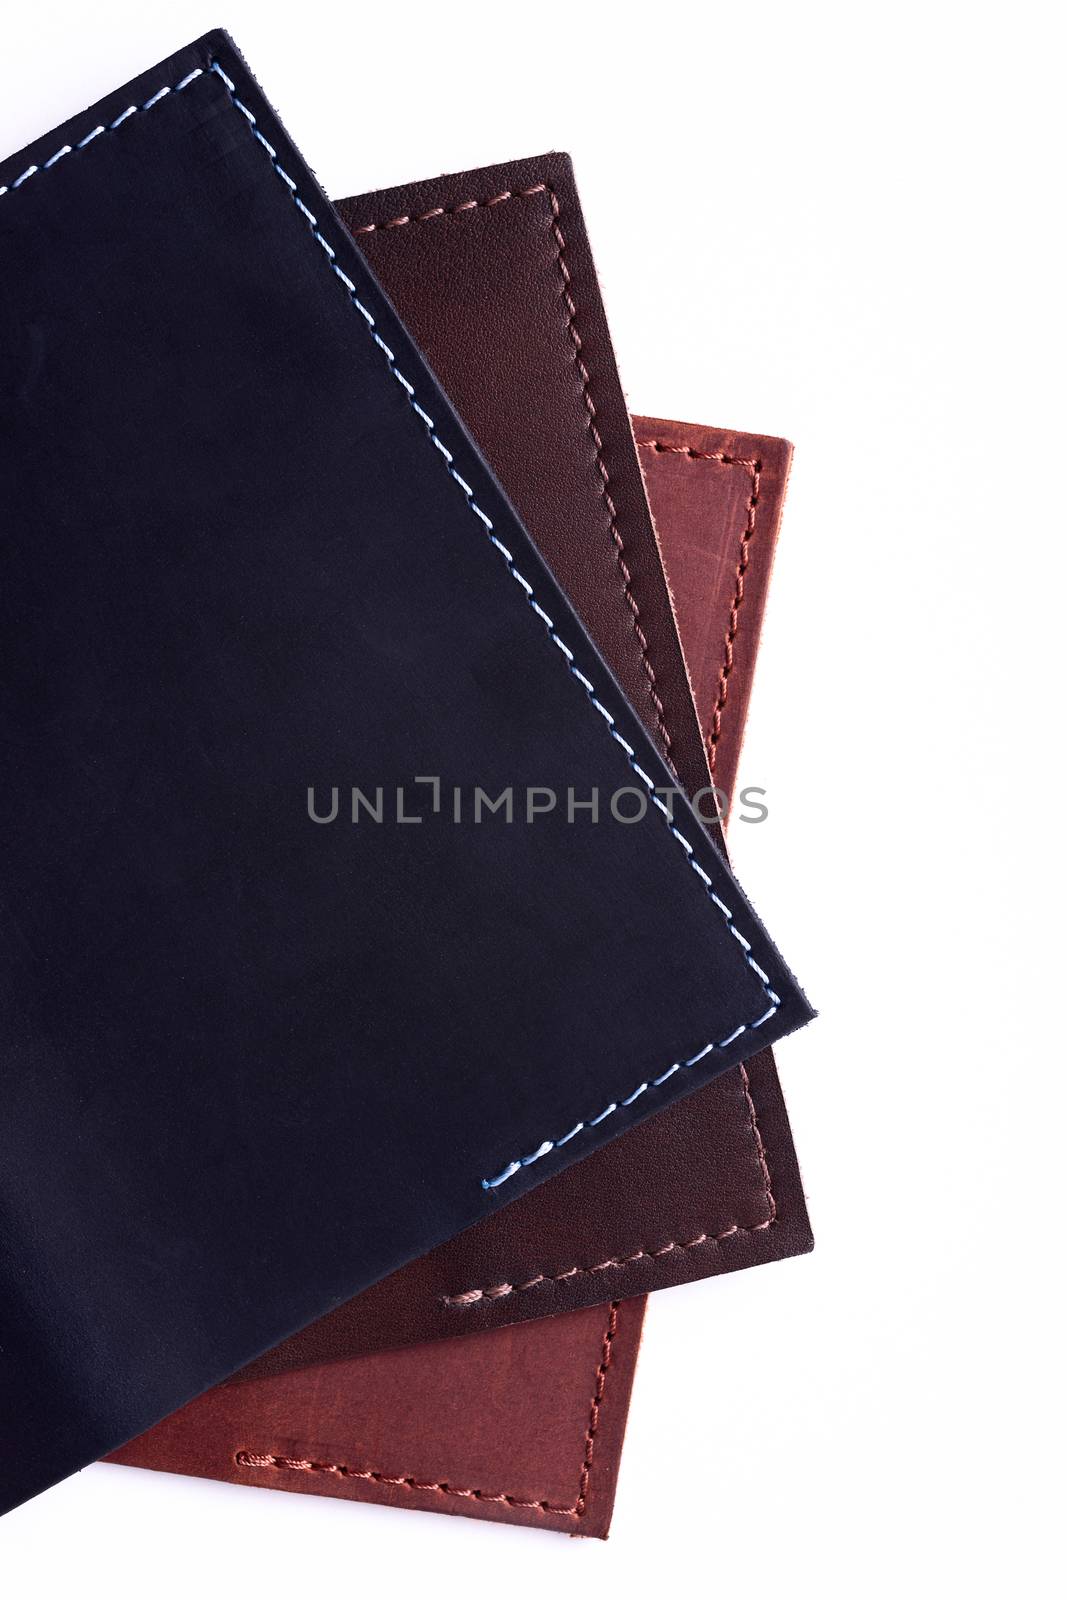 A parts of three handmade leather passport covers isolated on wh by alexsdriver